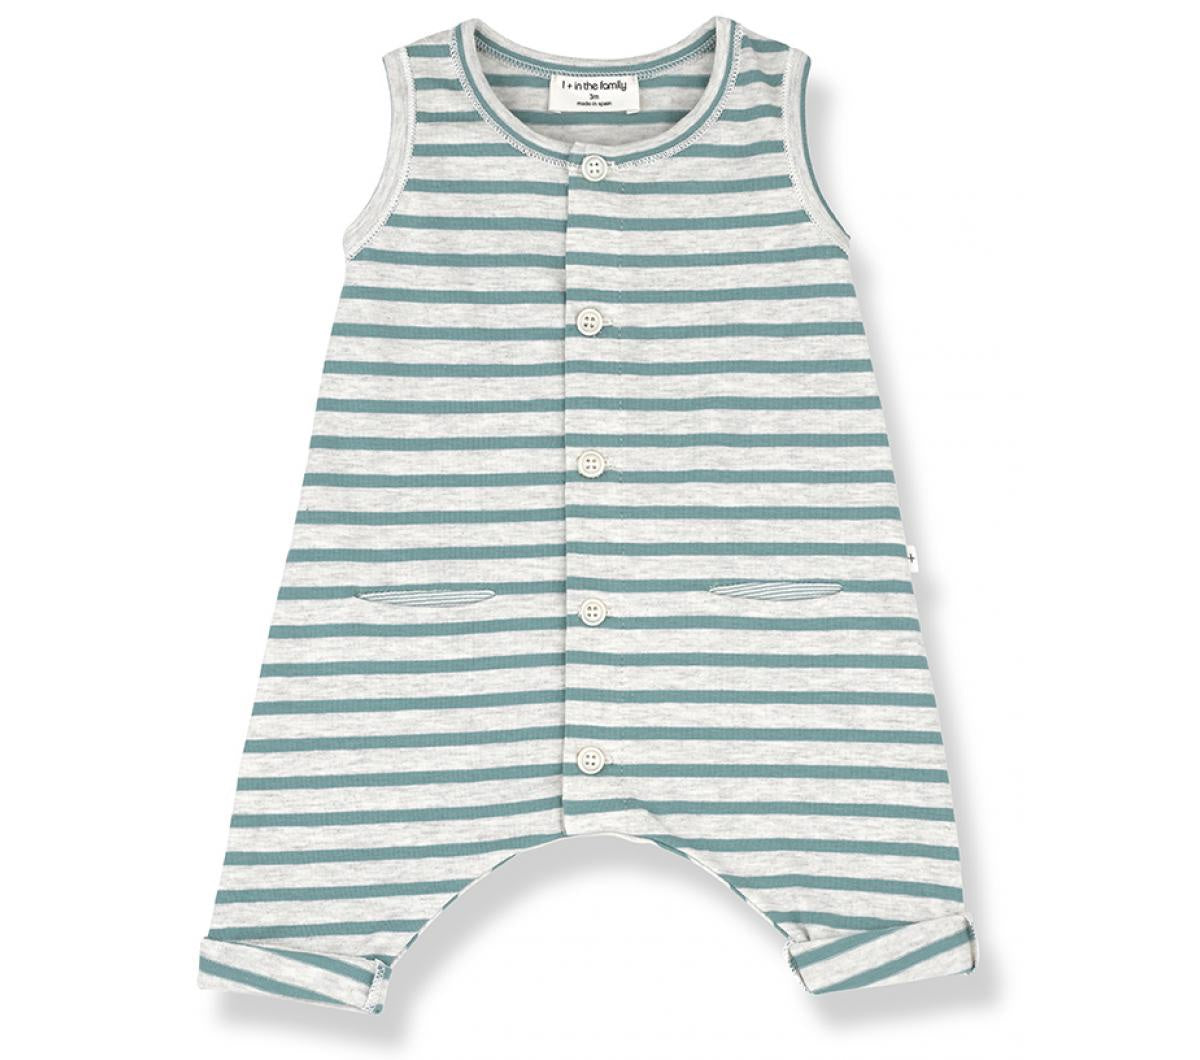 Mint green and white romper, short sleved for baby in organic cotton - full sized view 